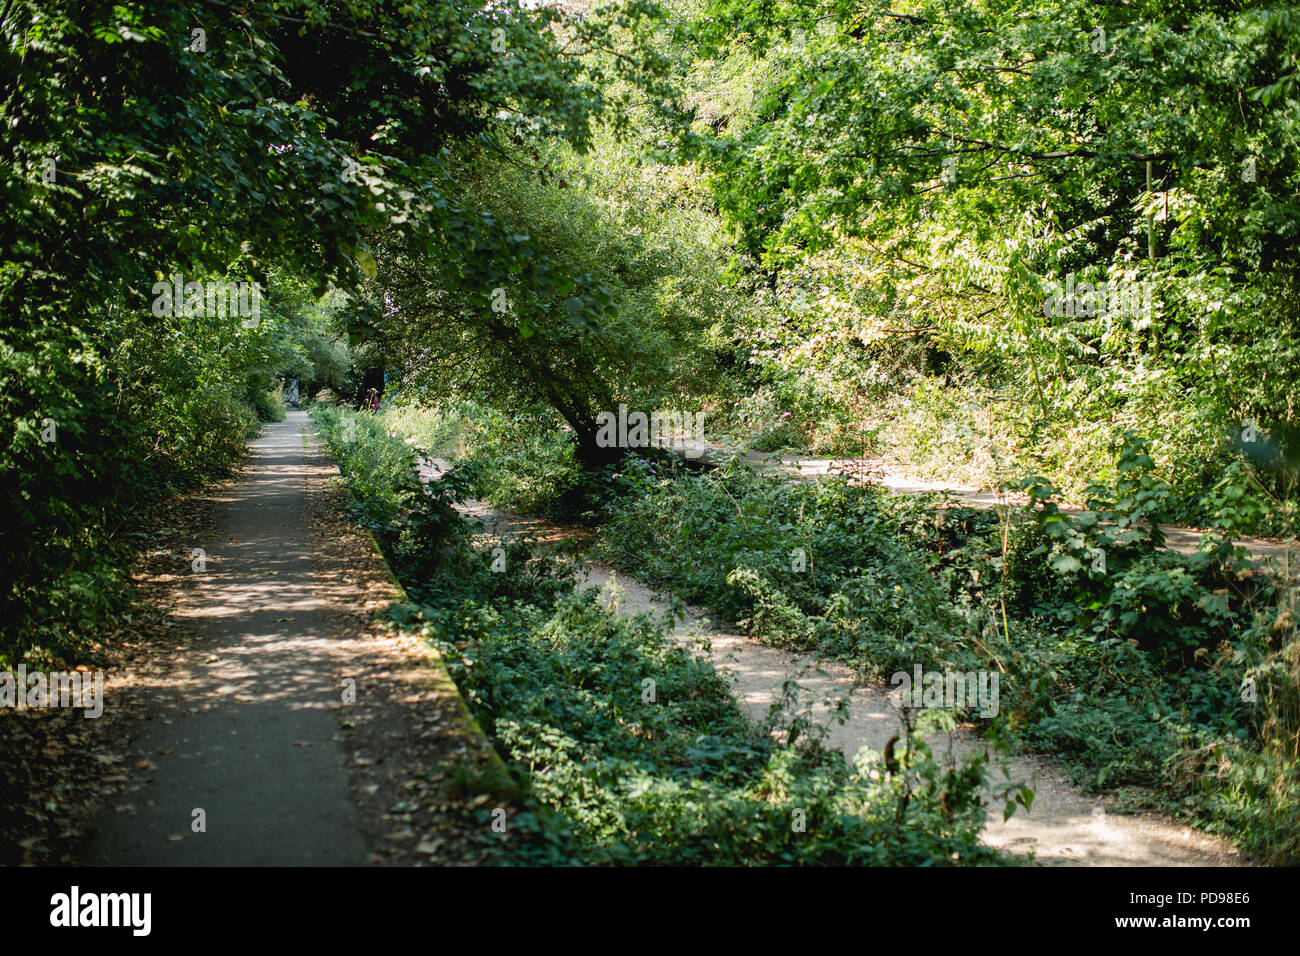 Disused, overgrown concrete train platforms of the old Crouch End Station along the old railway line/ track of the Parkland Walk in Haringey, N.London Stock Photo